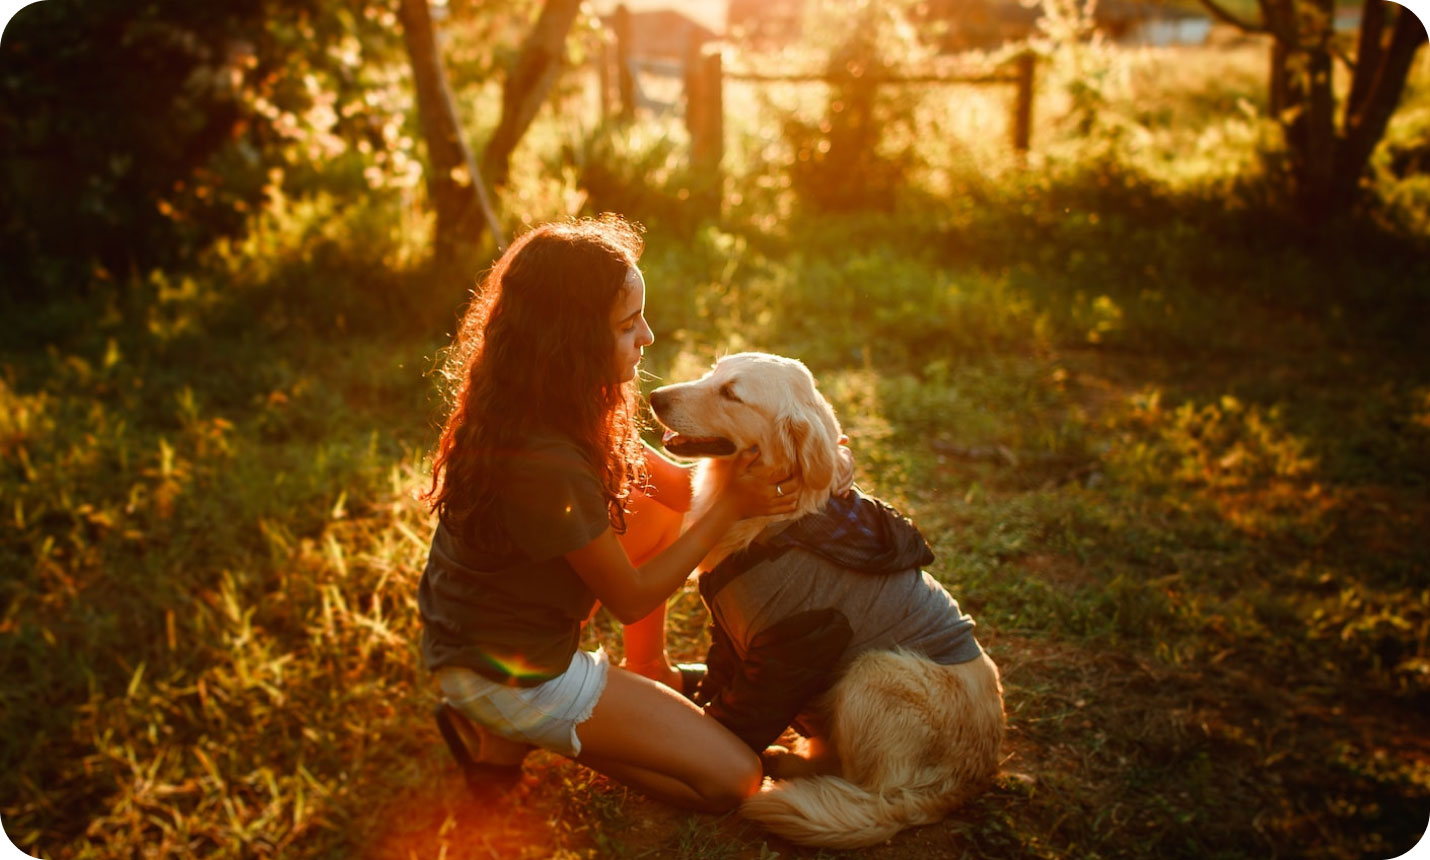 A young woman kneels in front of a Golden Retriever service dog.